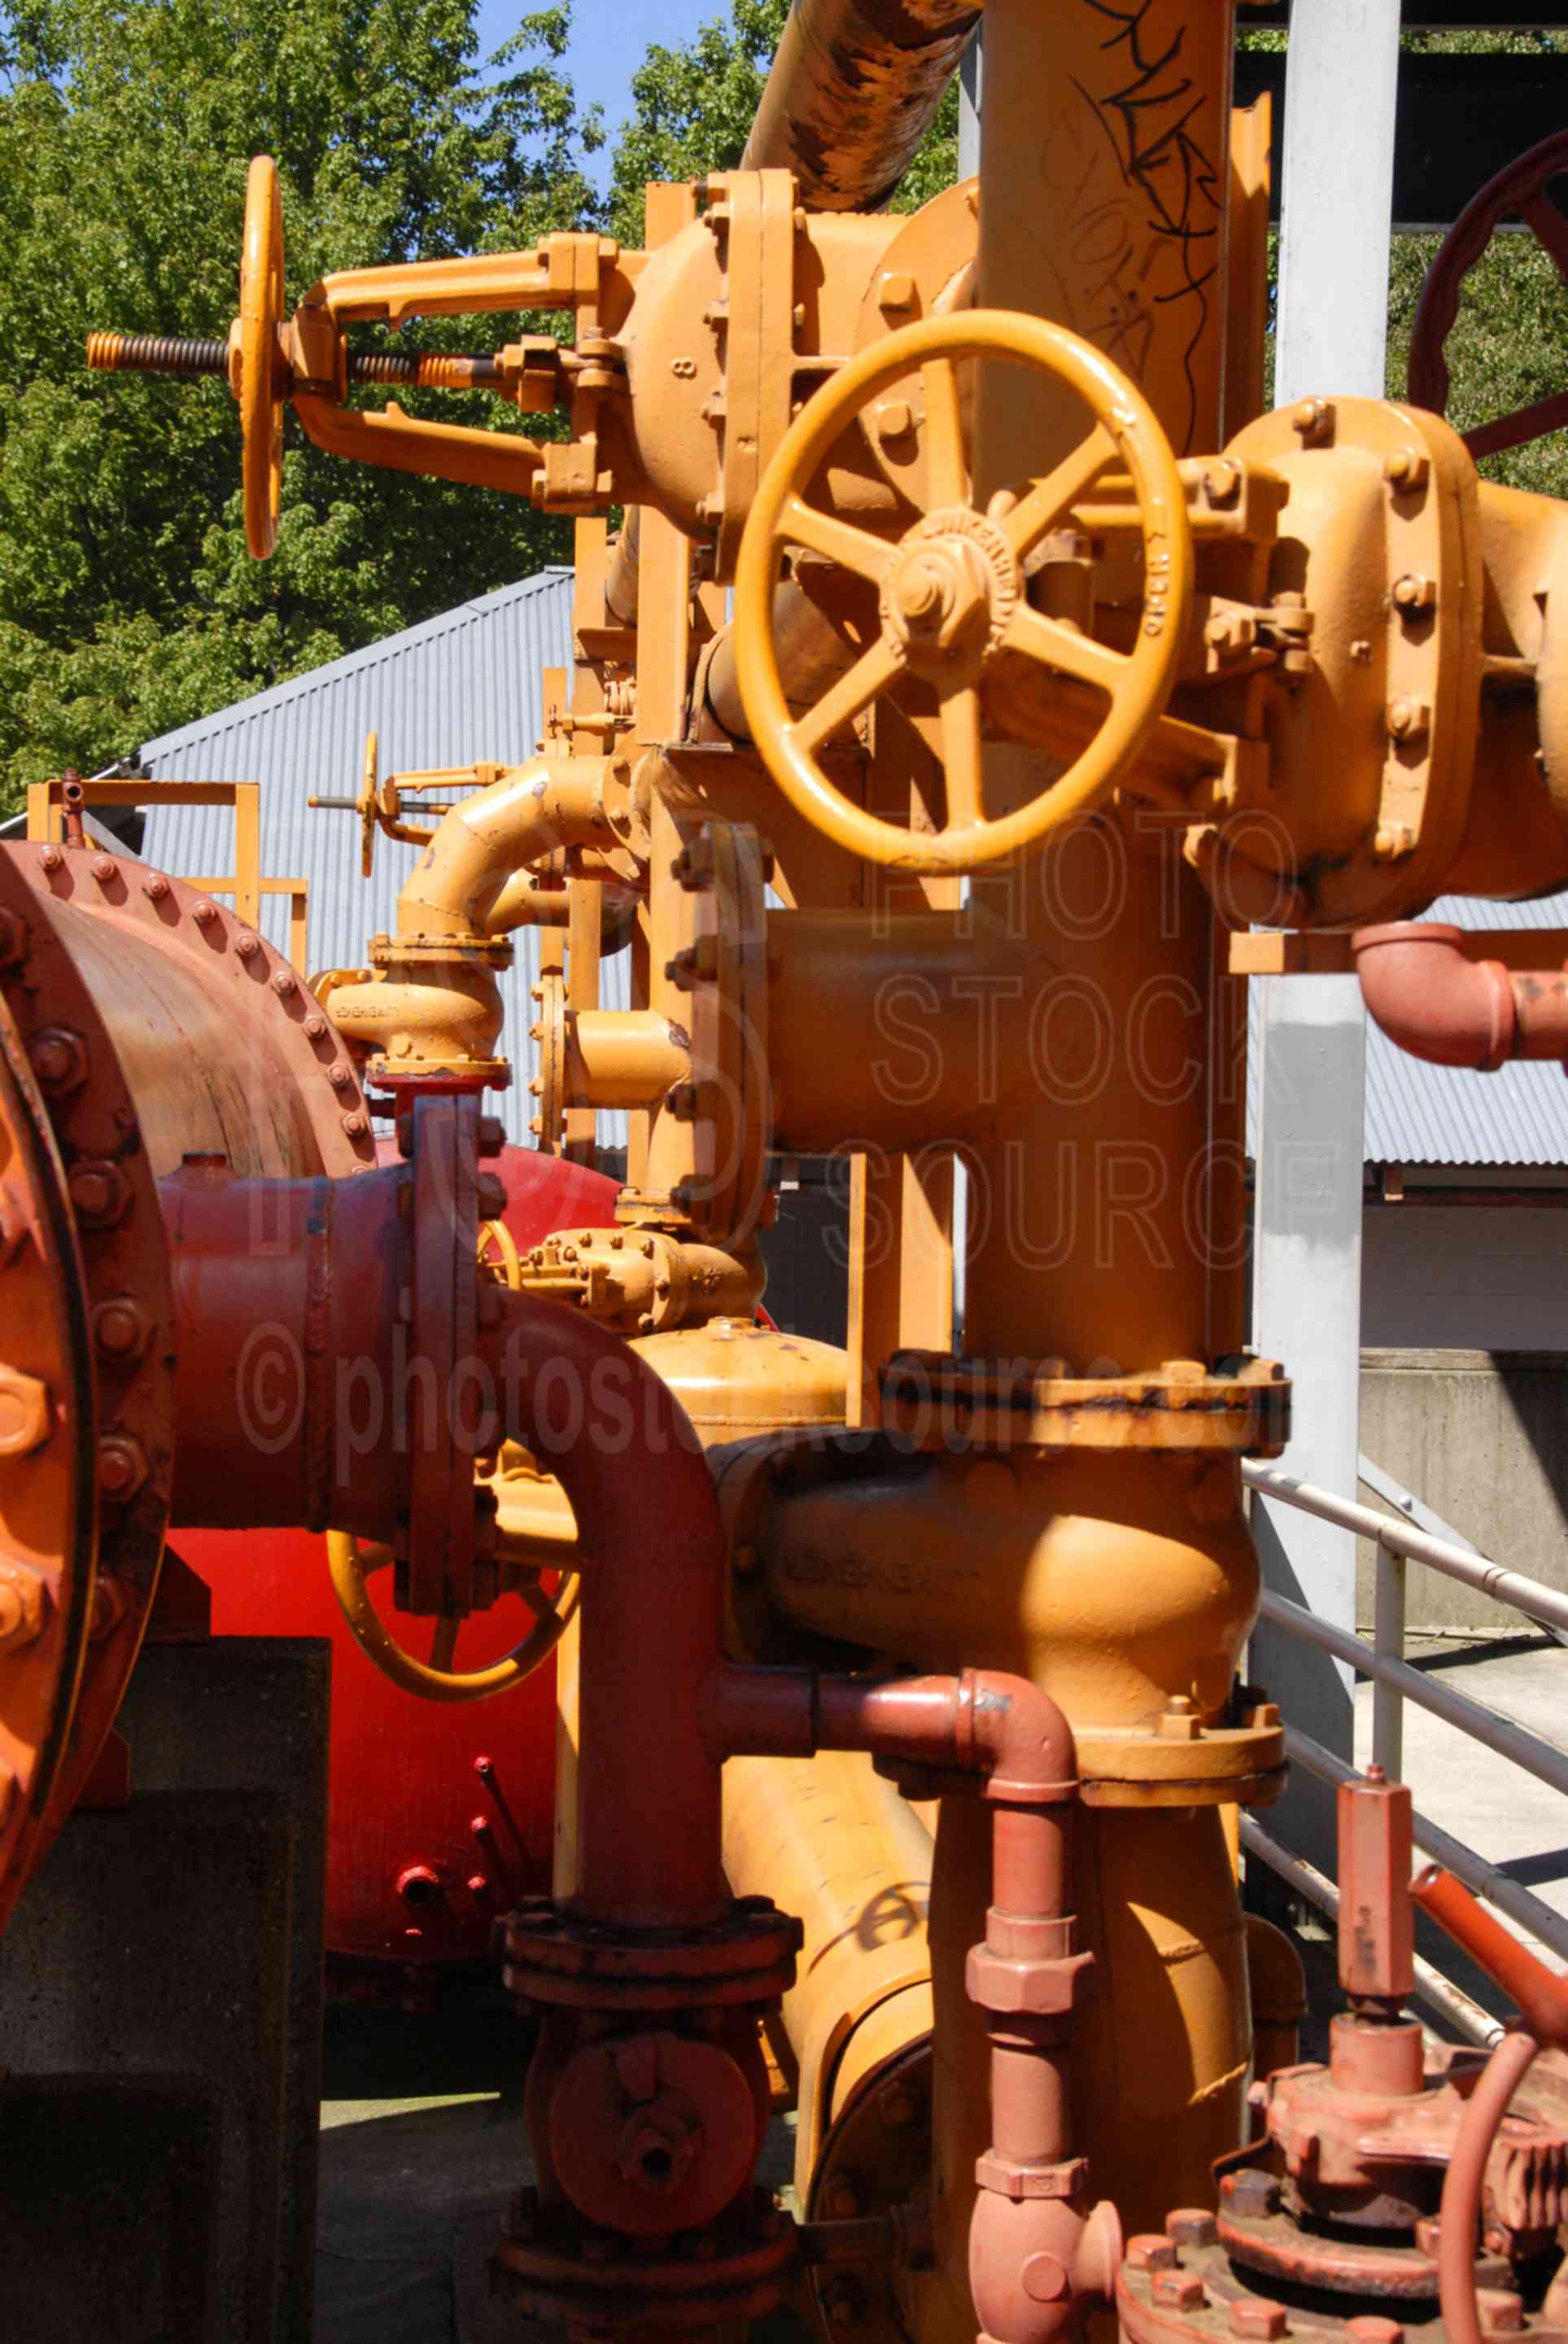 Gas Works,valve,valves,pipe,pipes,tanks,coal gas,utility,production,energy